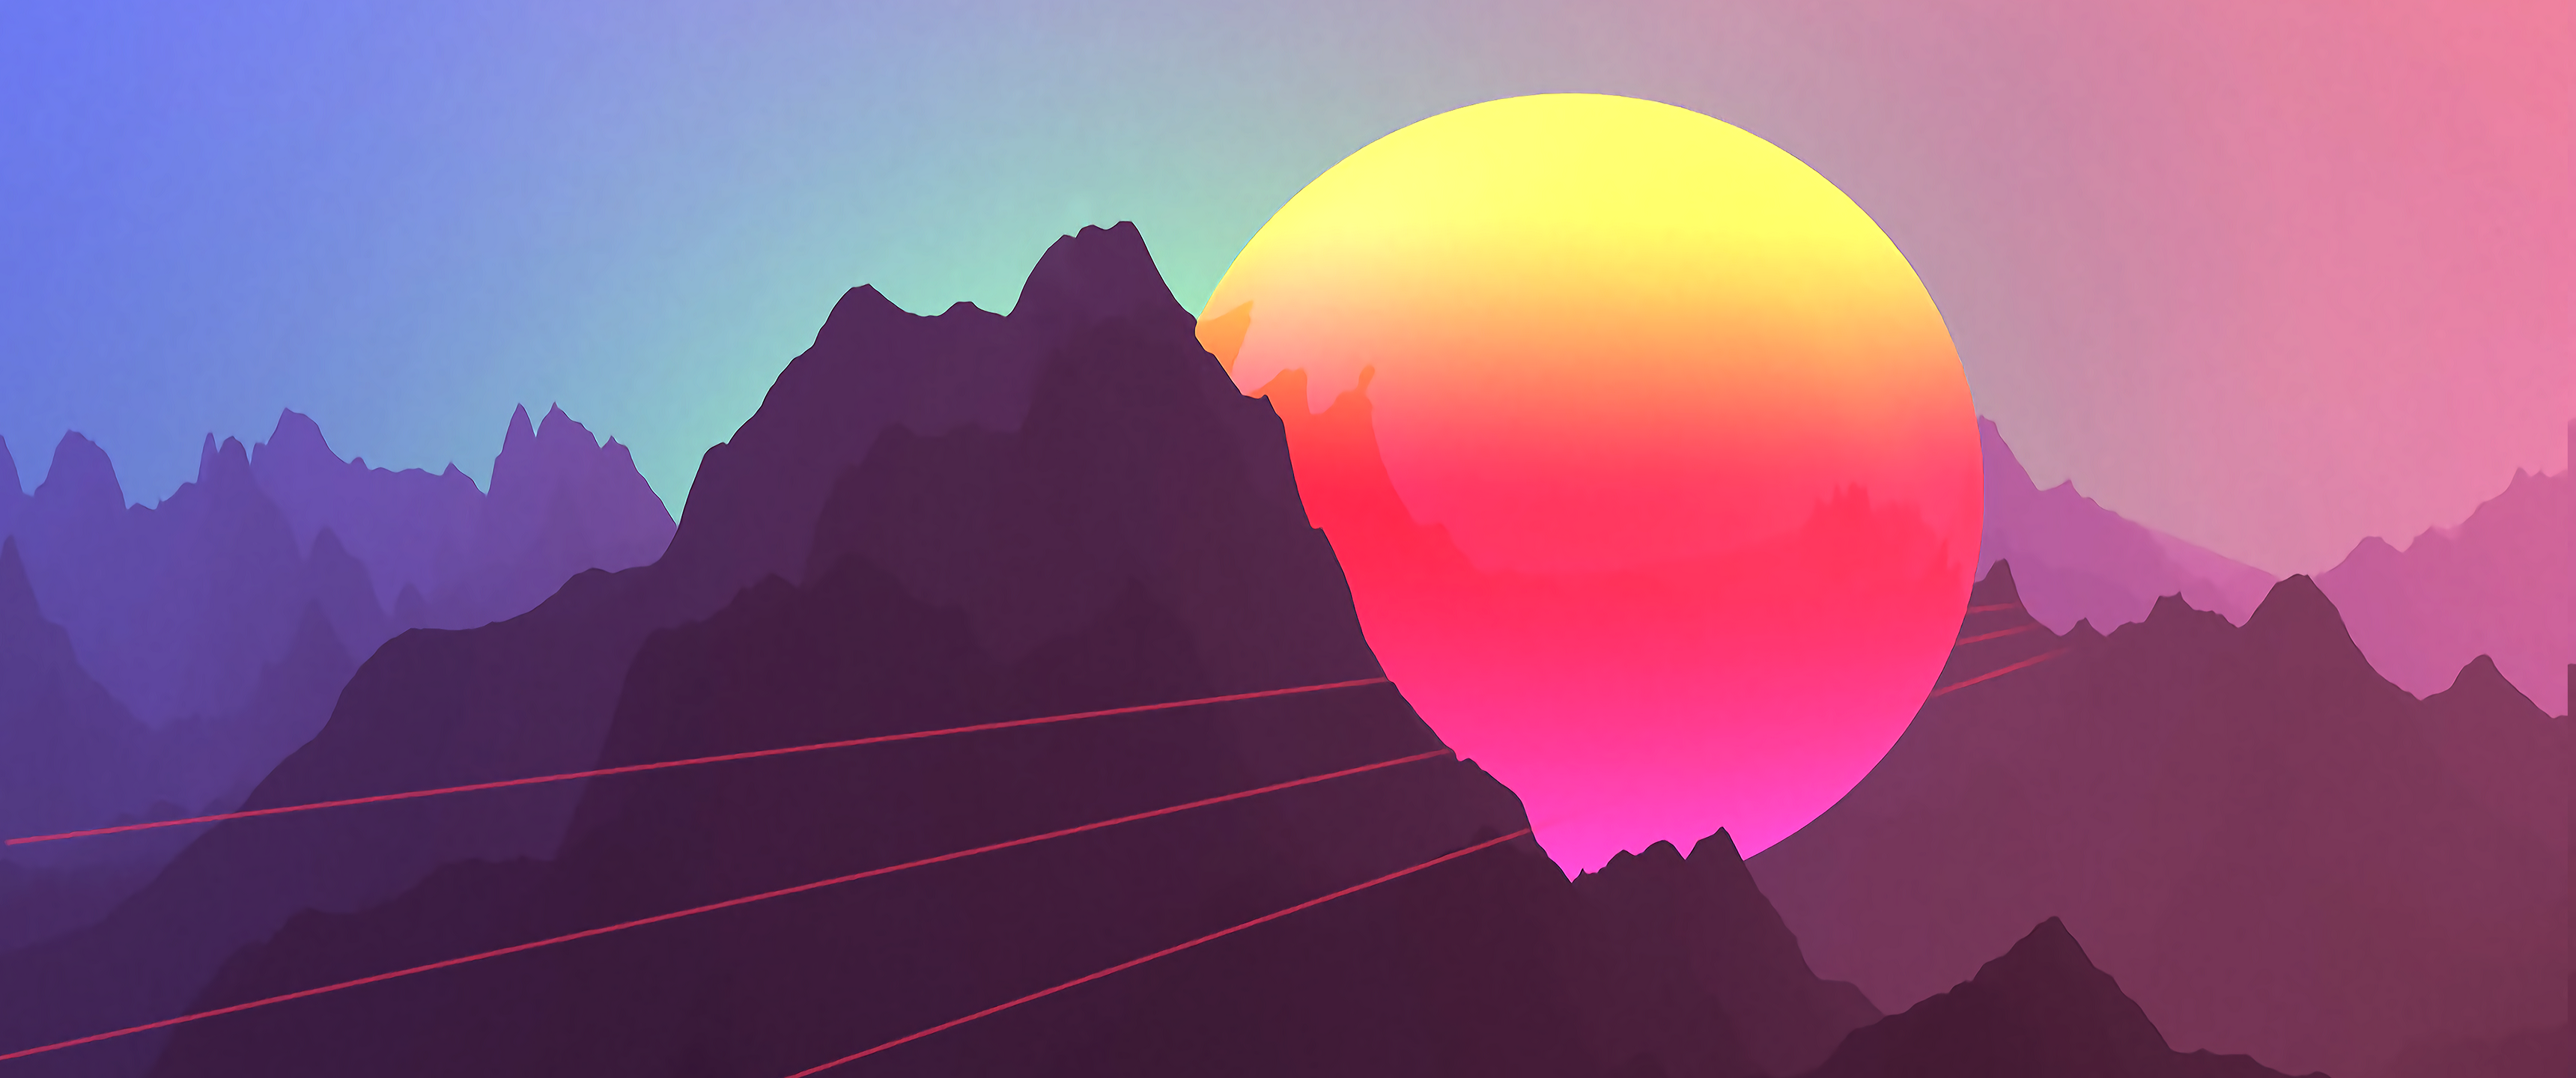 General 3440x1440 mountains Sun abstract